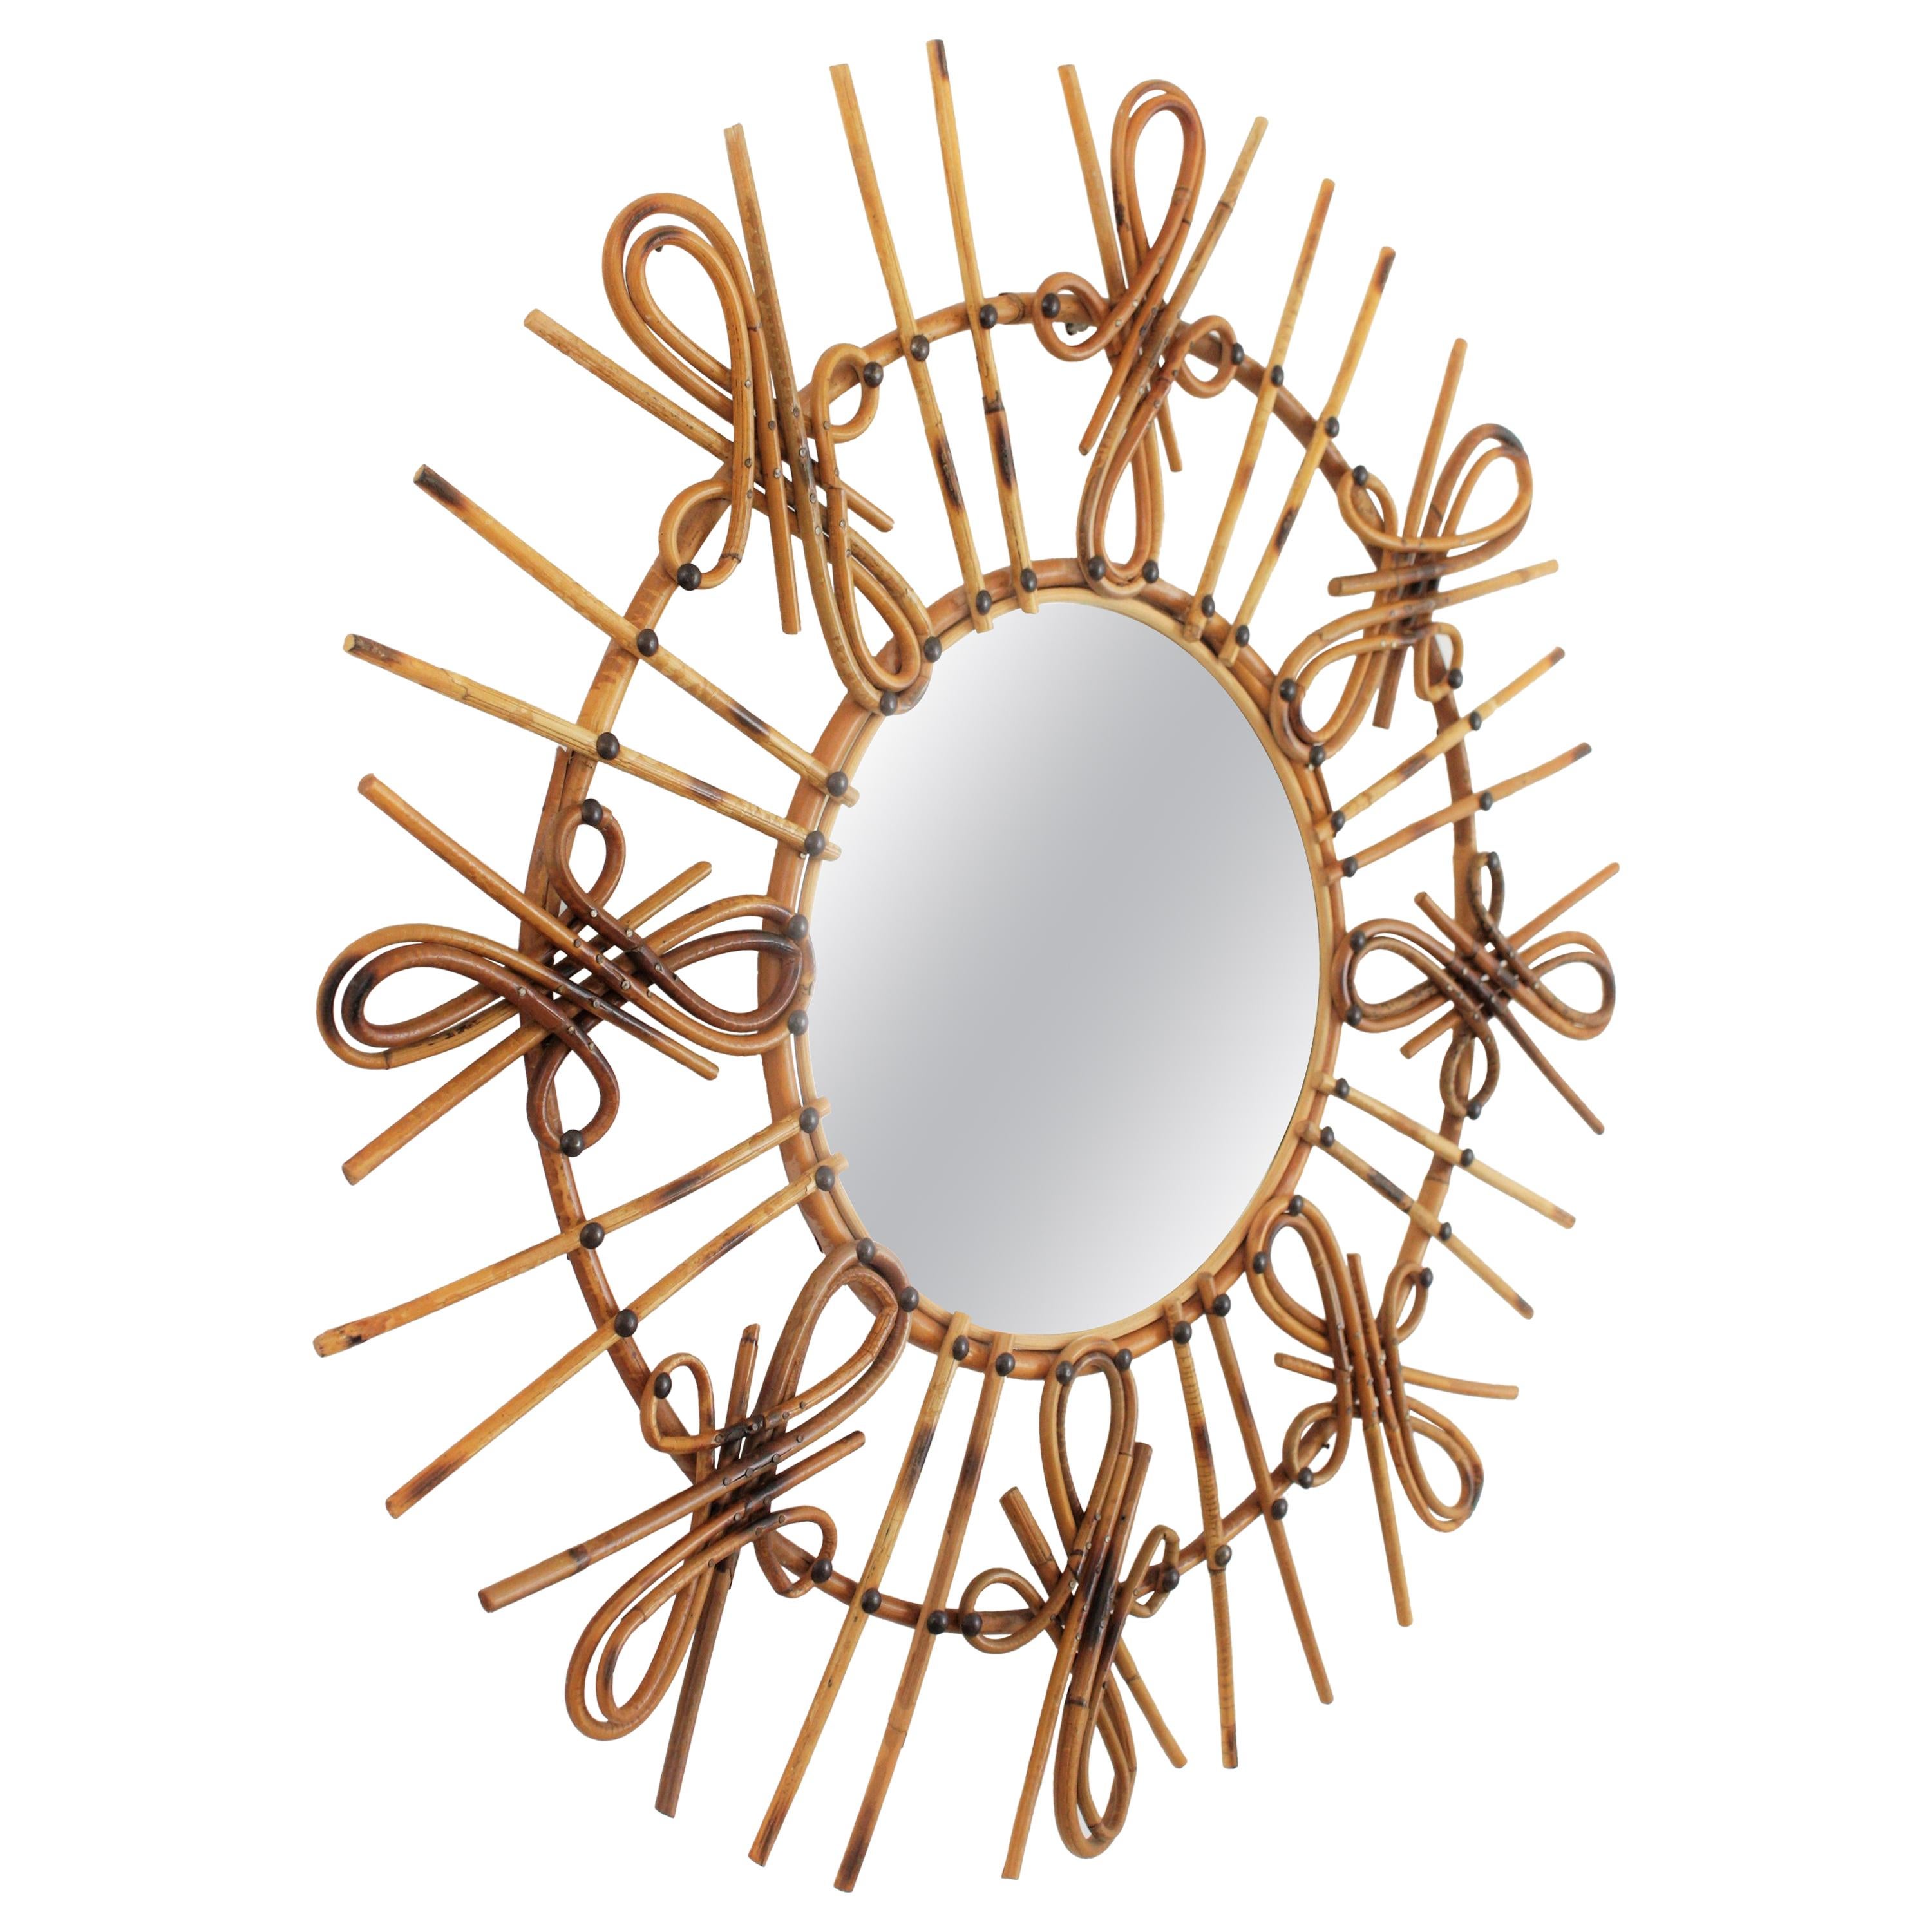 A highly decorative mid-20th century mirror handcrafted in rattan with pyrography decorations and chinoiserie or Tiki accents.
Spain, 1950-1960.
This eye-catching sunburst mirror combines midcentury and chinoiserie accents and it would be a nice